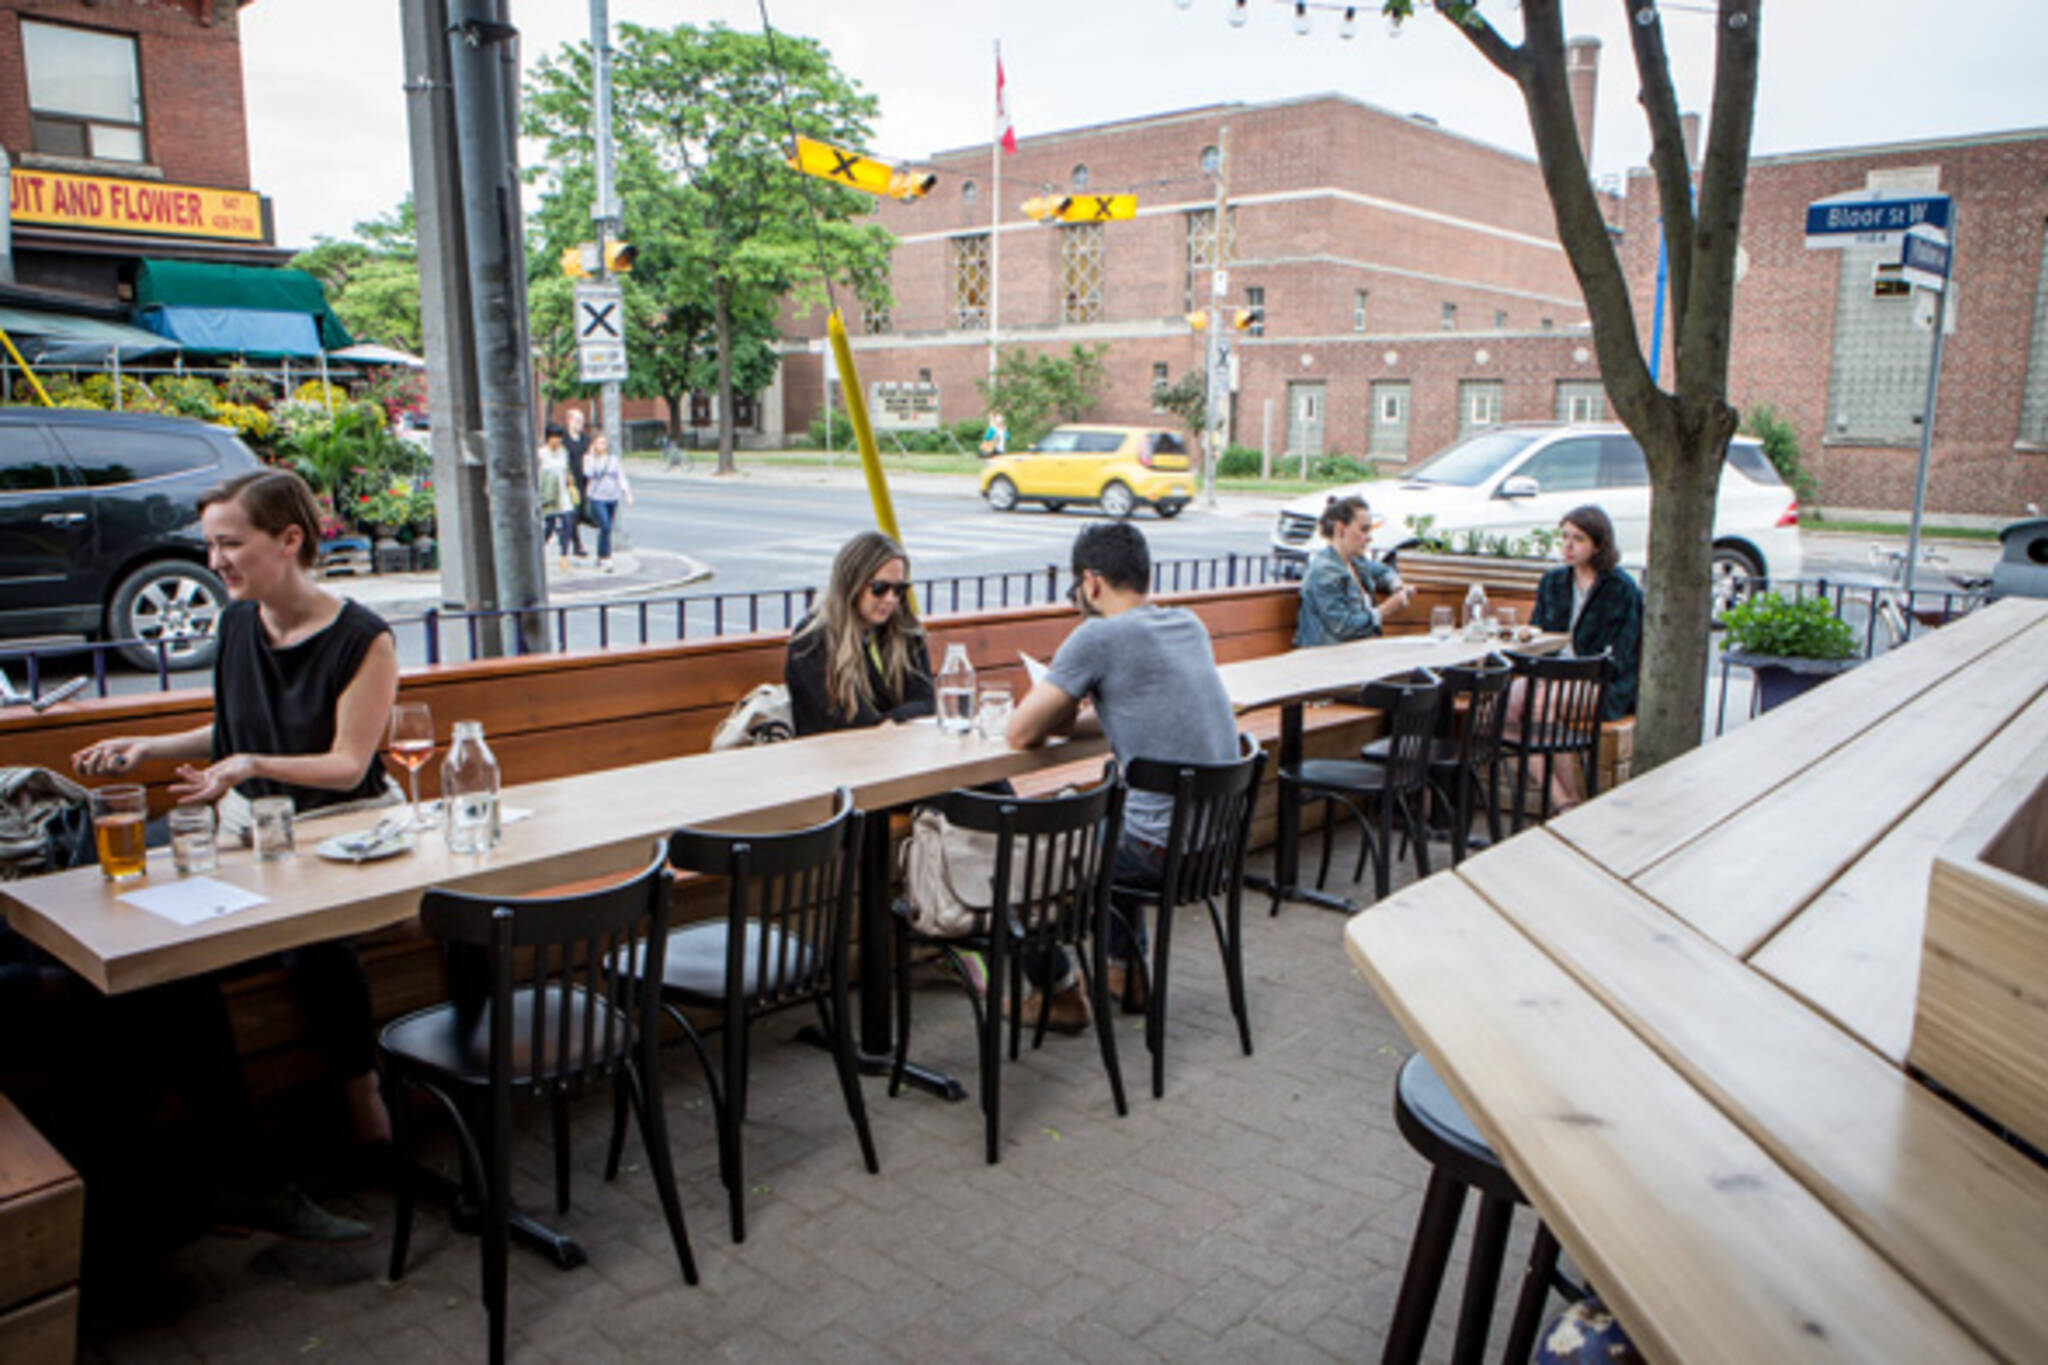 The top 10 patios in Bloordale and Bloorcourt